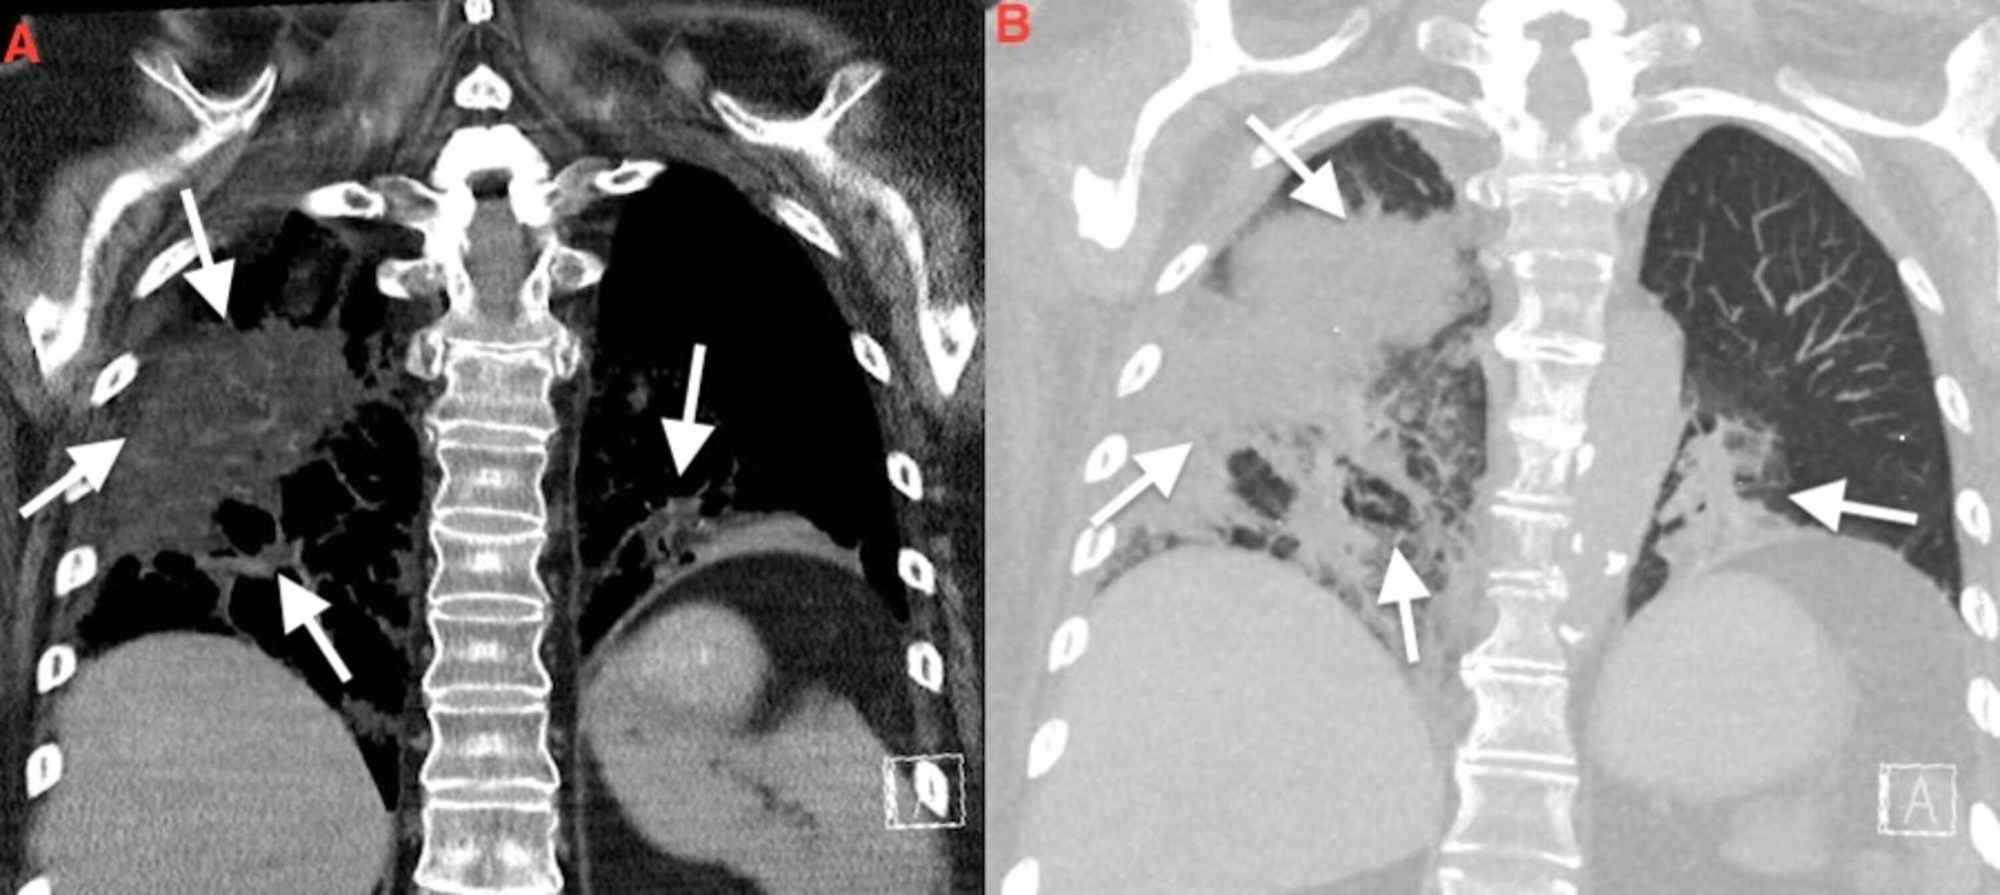 Cureus | Exogenous Lipoid Pneumonia Complicated by Mineral Oil Aspiration  in a Patient With Chronic Constipation: A Case Report and Review | Article